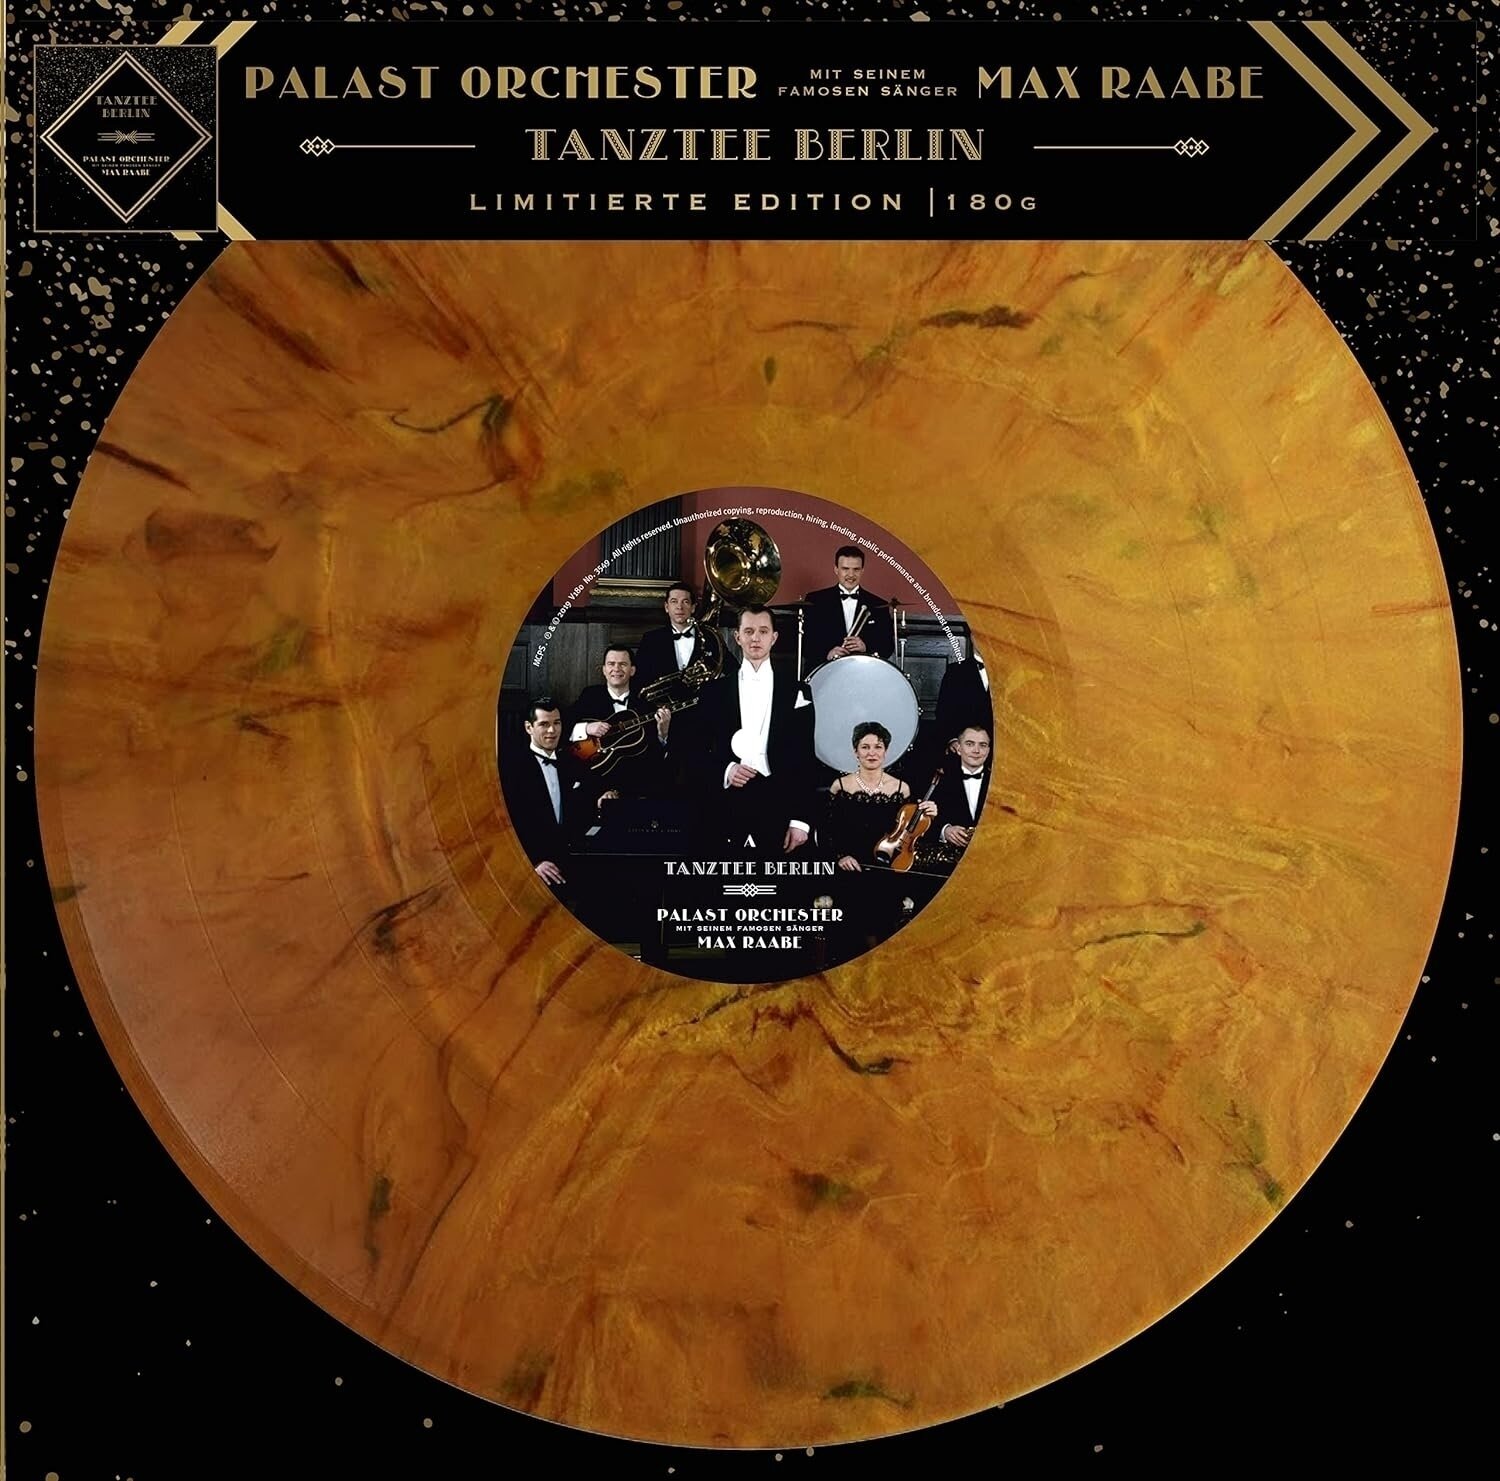 LP plošča Palast Orchester - Tanztee Berlin (Limited Edition) (Golden Yellow Marbled Coloured) (LP)